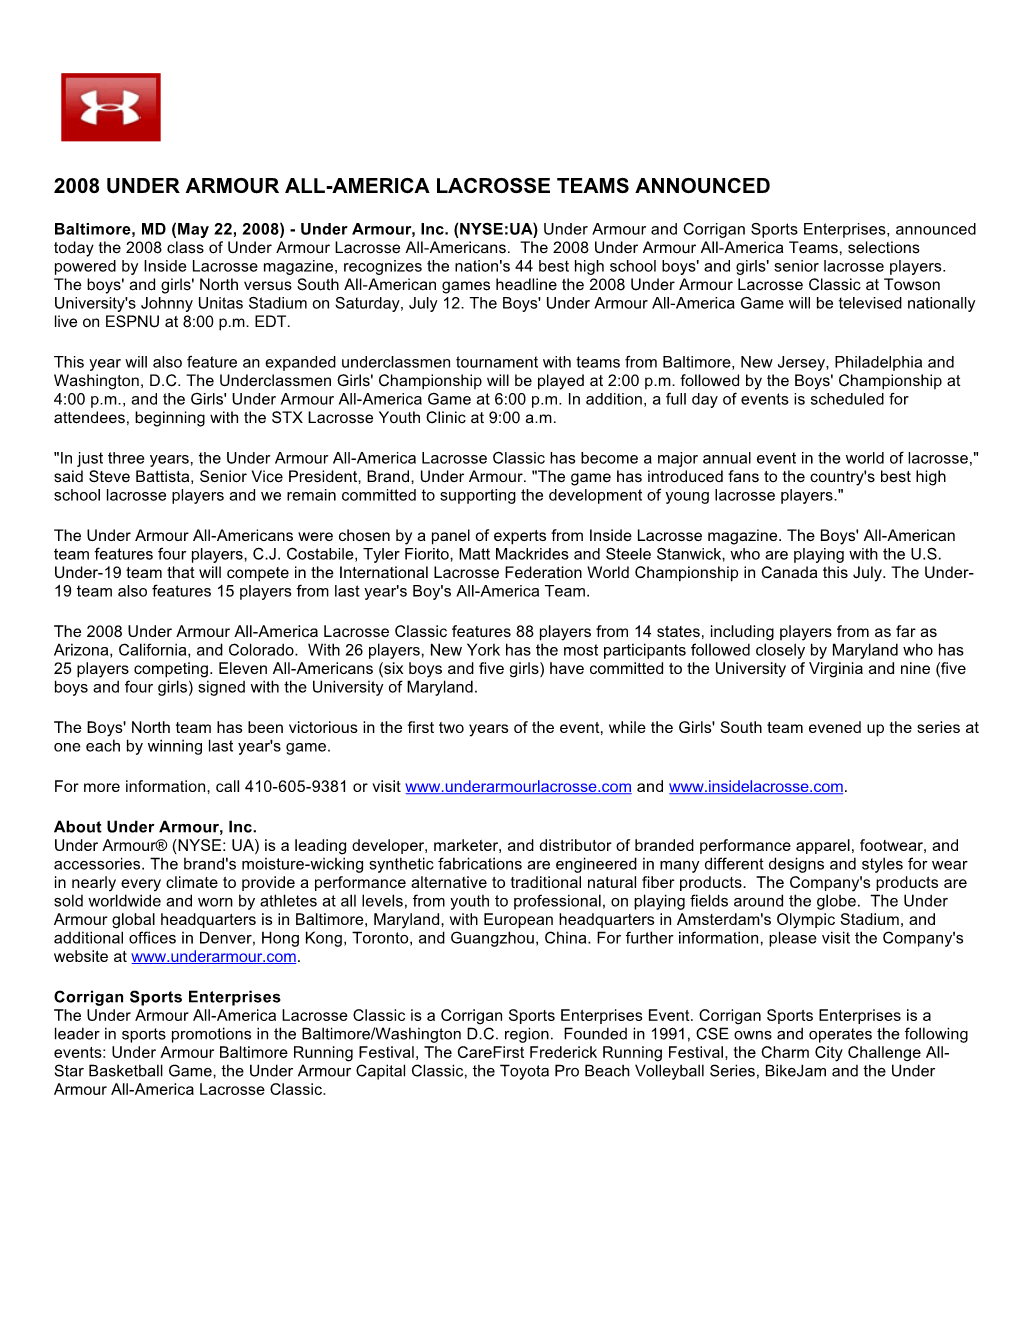 2008 Under Armour All-America Lacrosse Teams Announced